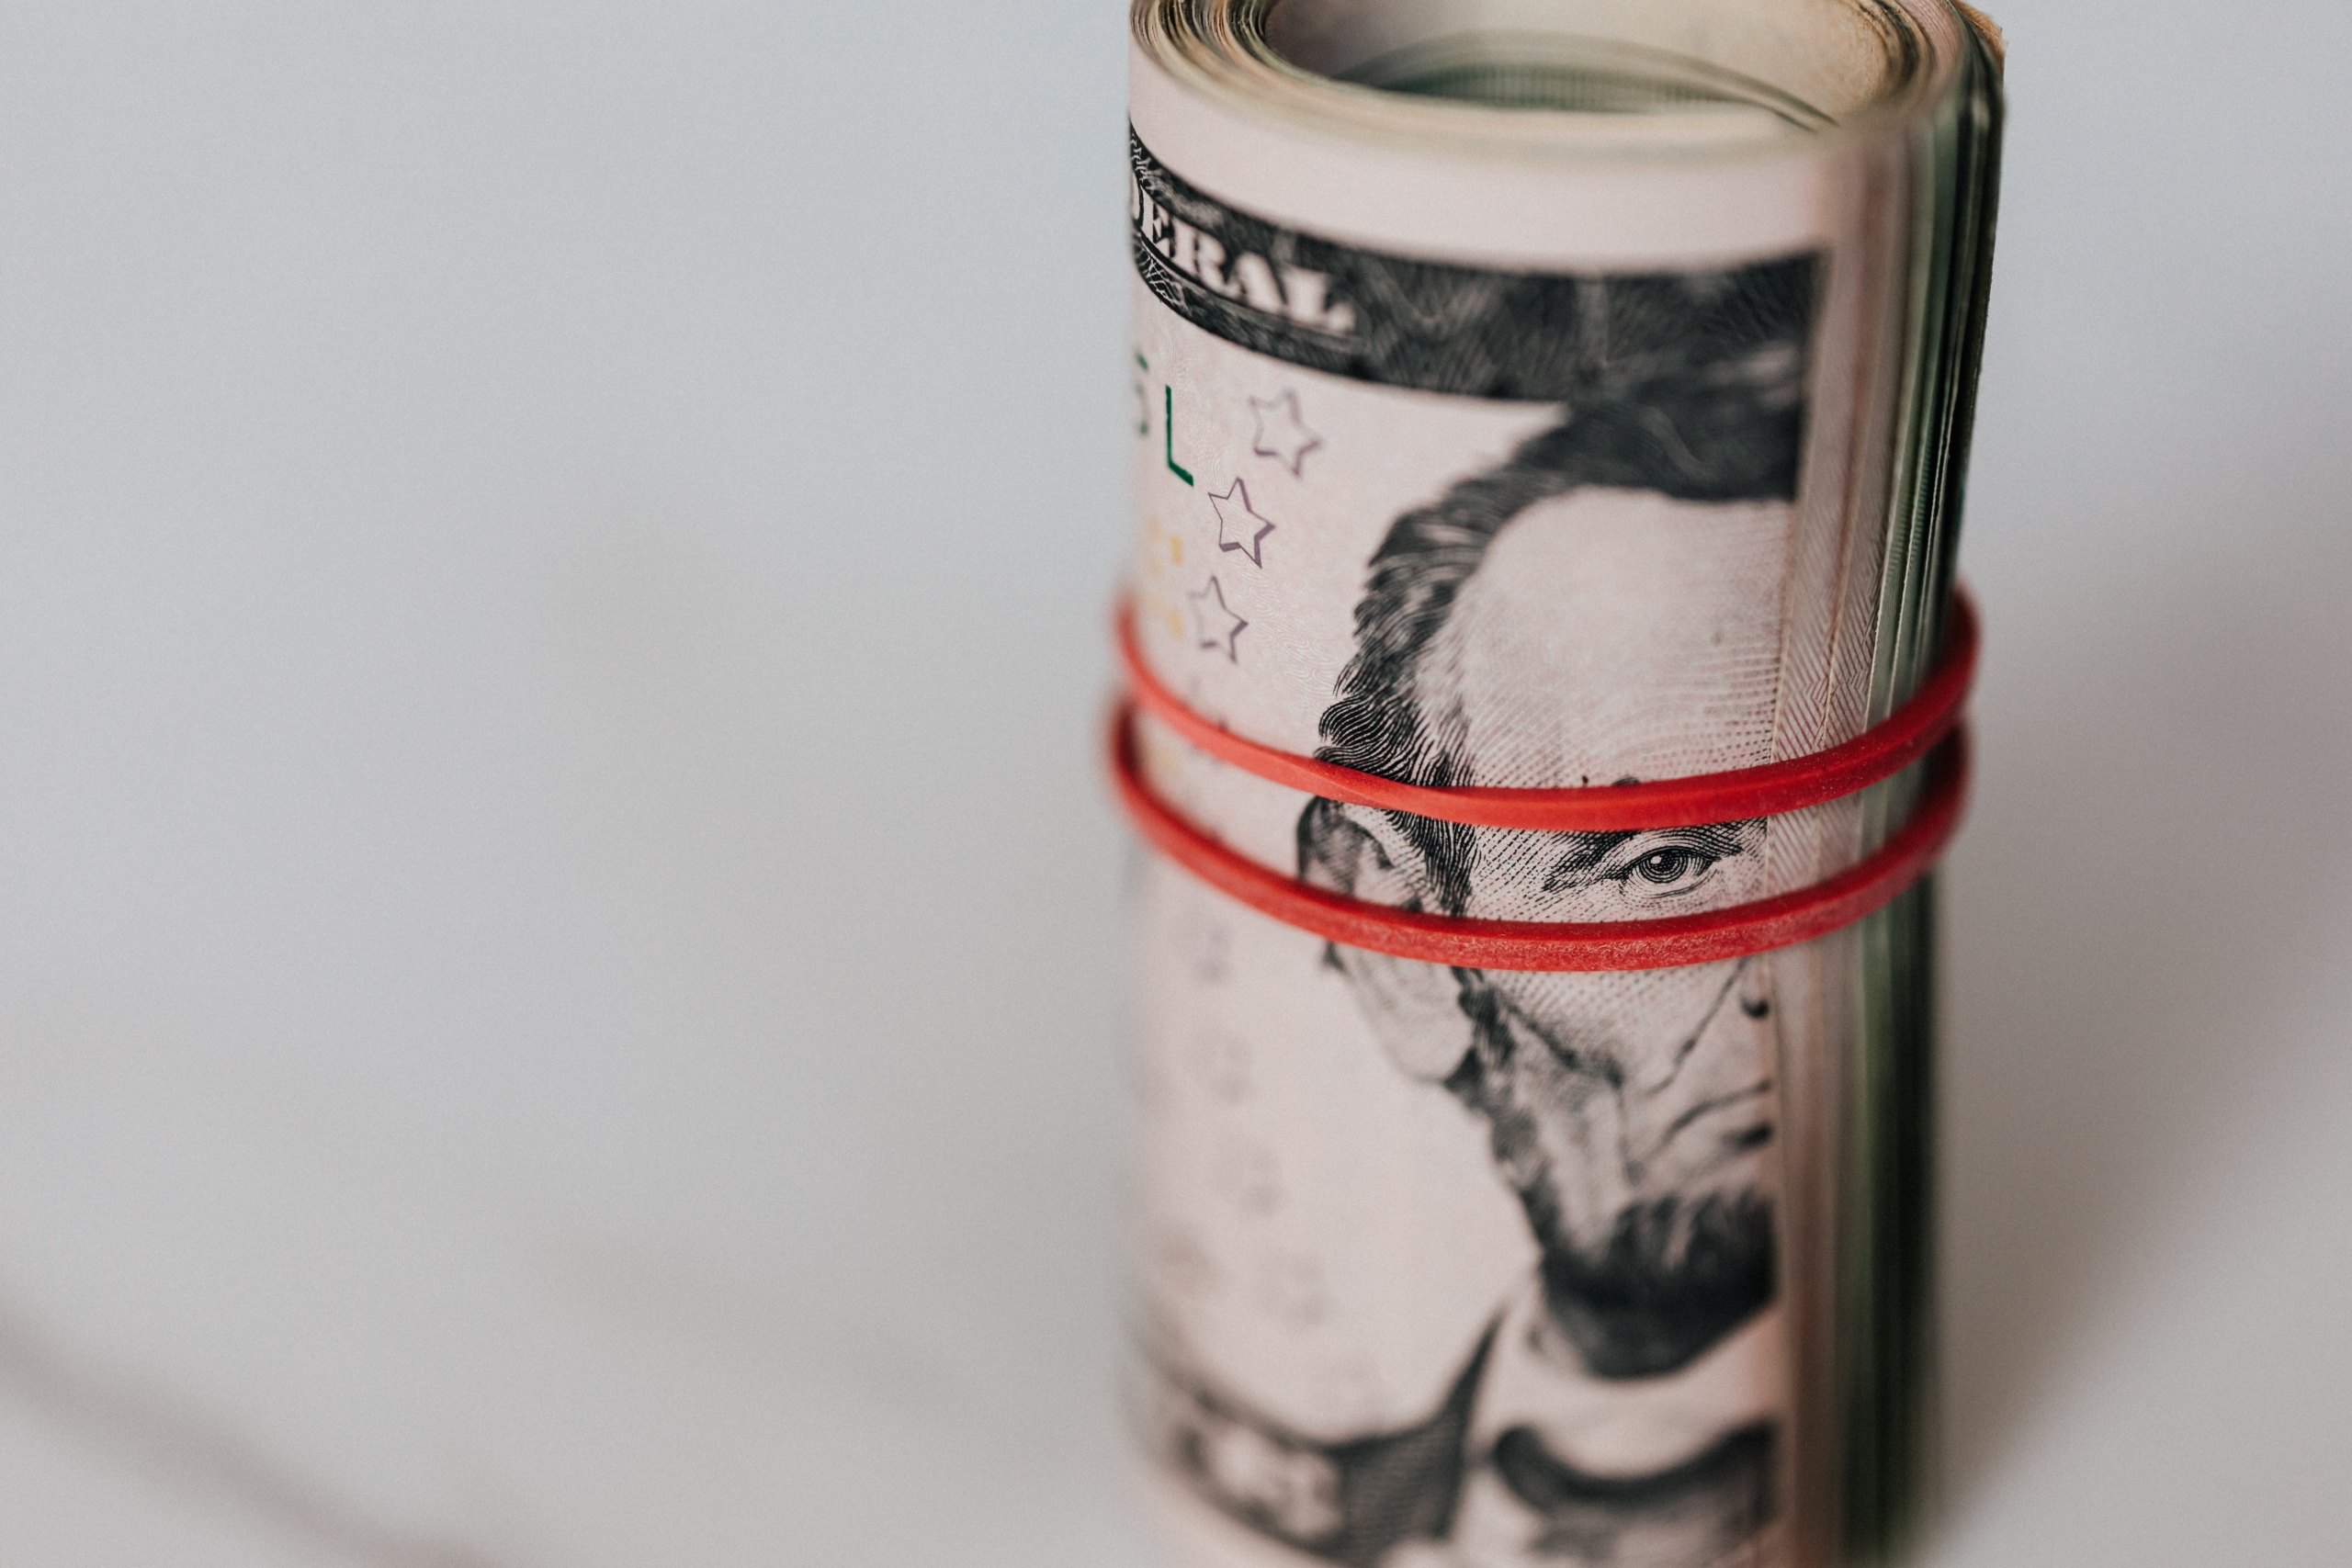 Photo by Karolina Grabowska: https://www.pexels.com/photo/roll-of-american-dollars-tightened-with-red-band-4386471/